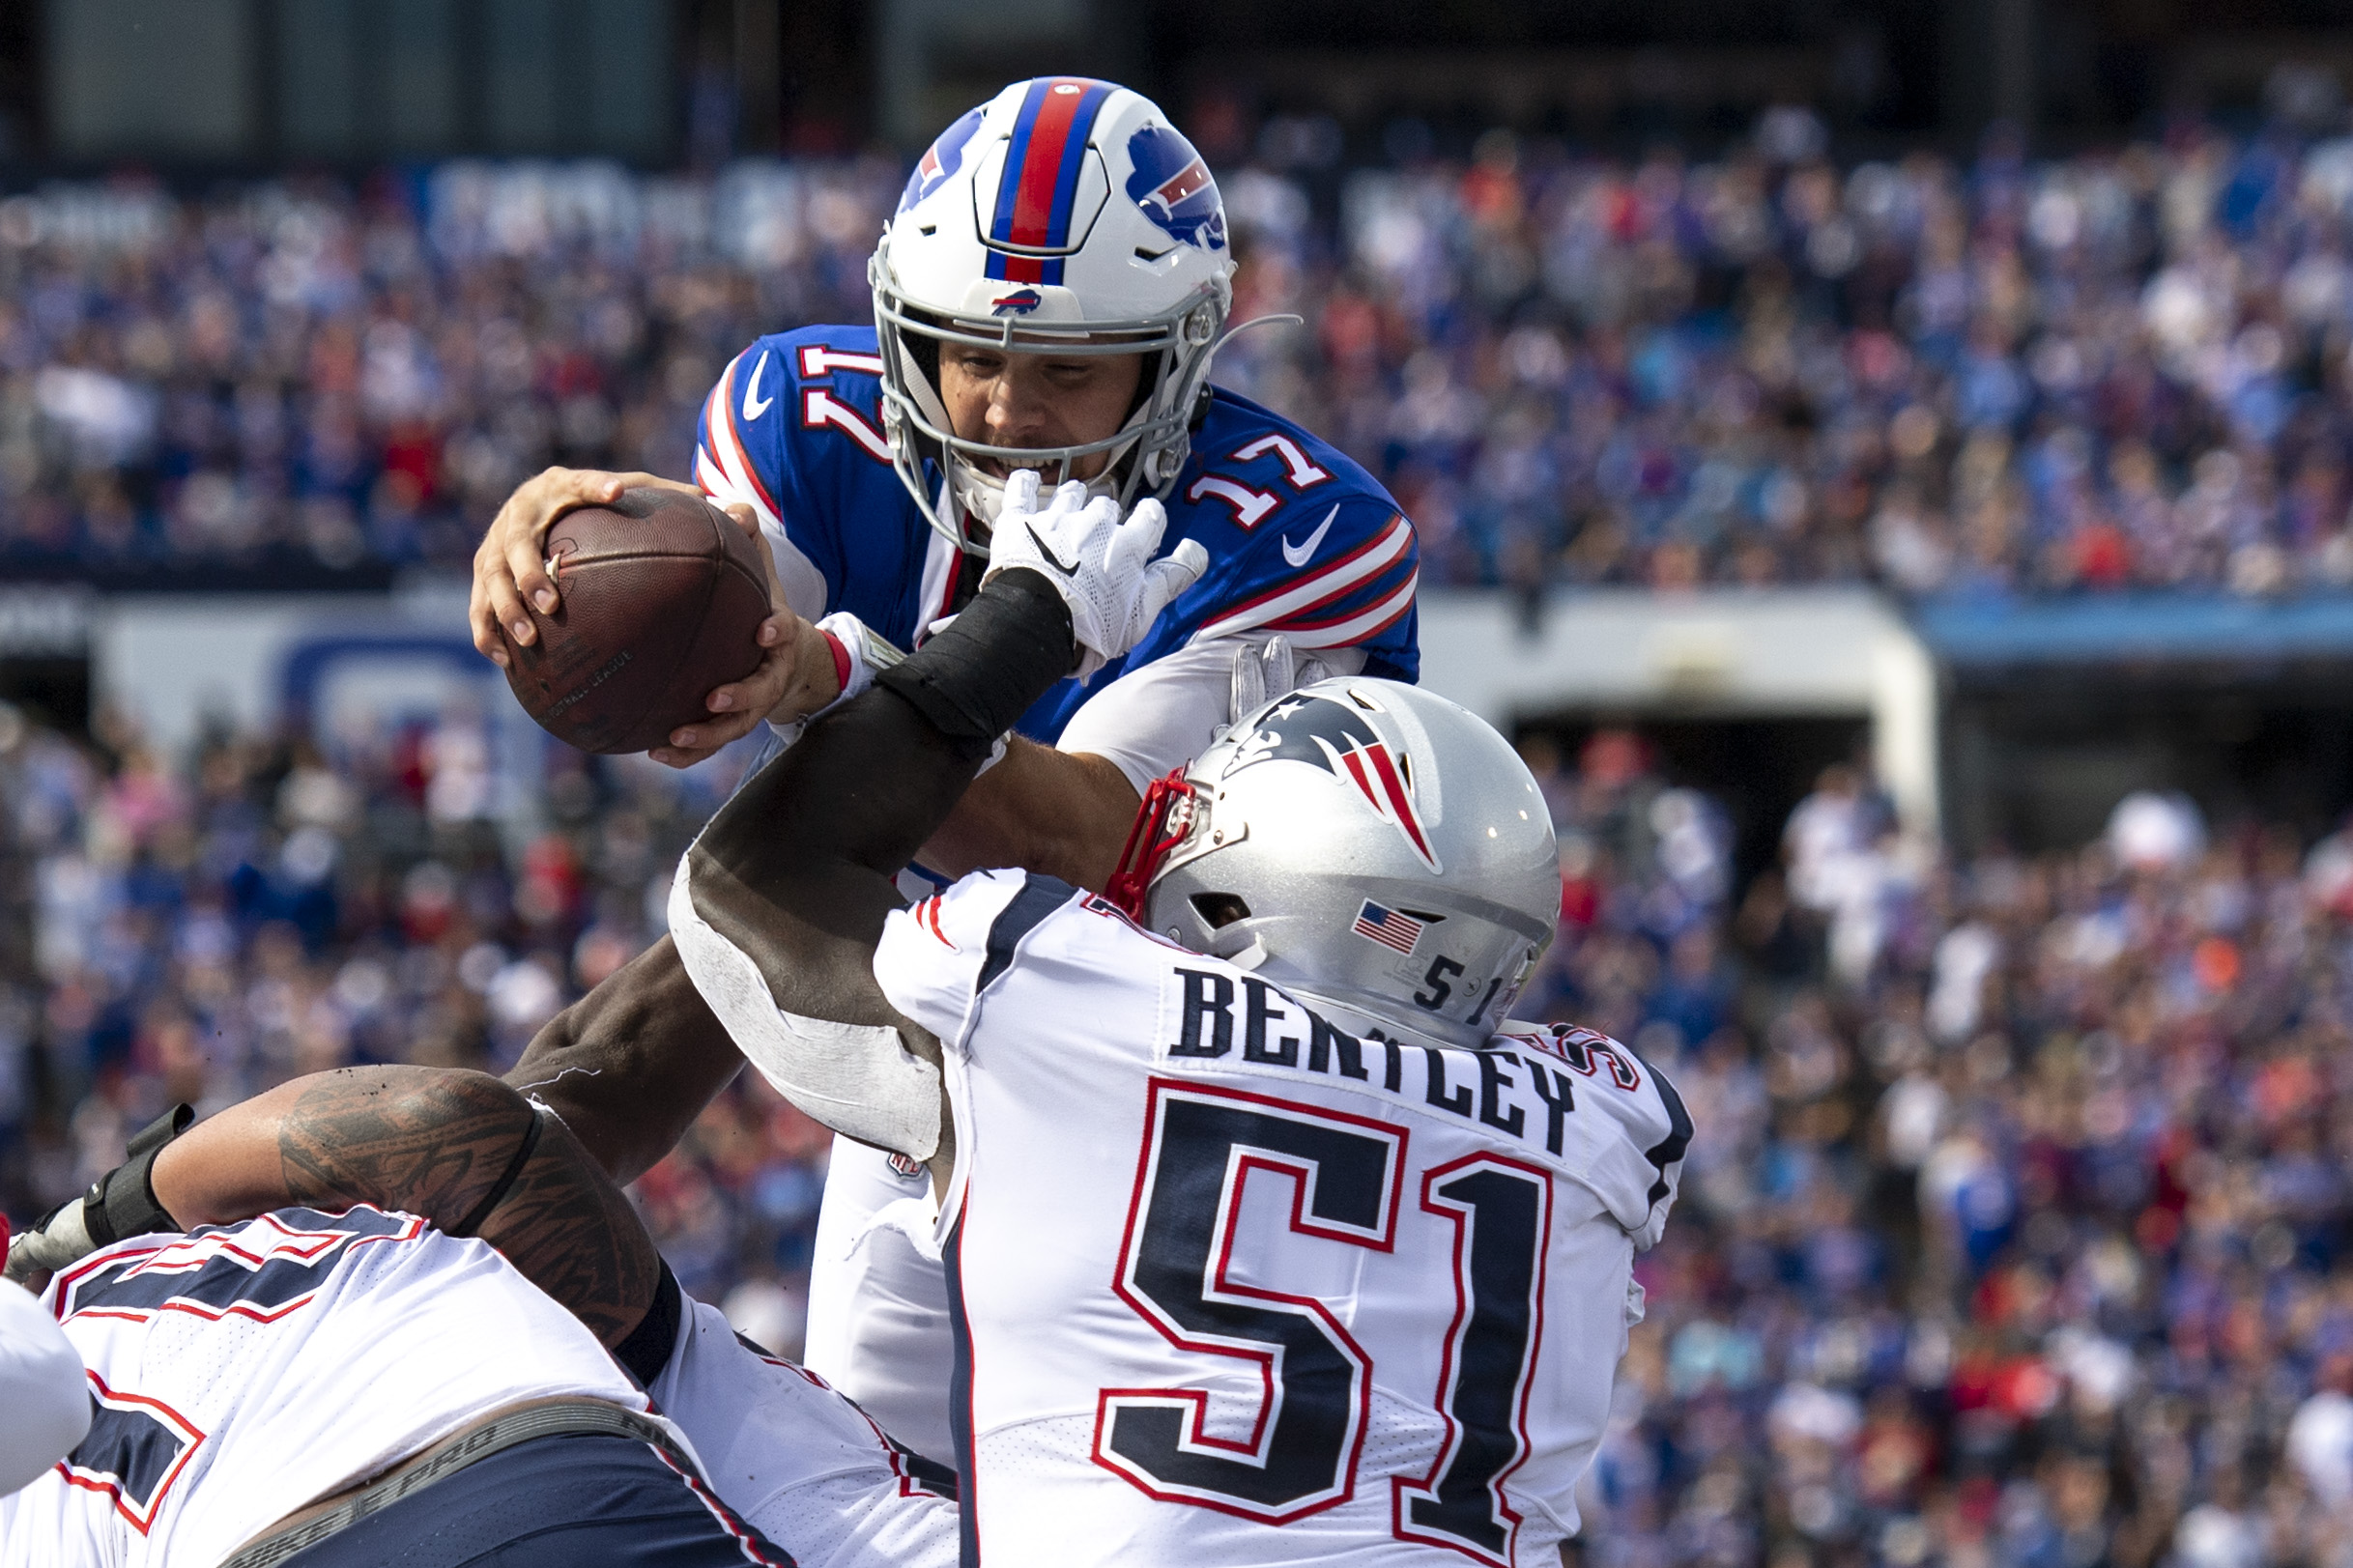 5 takeaways from the Patriots' loss to the Bills